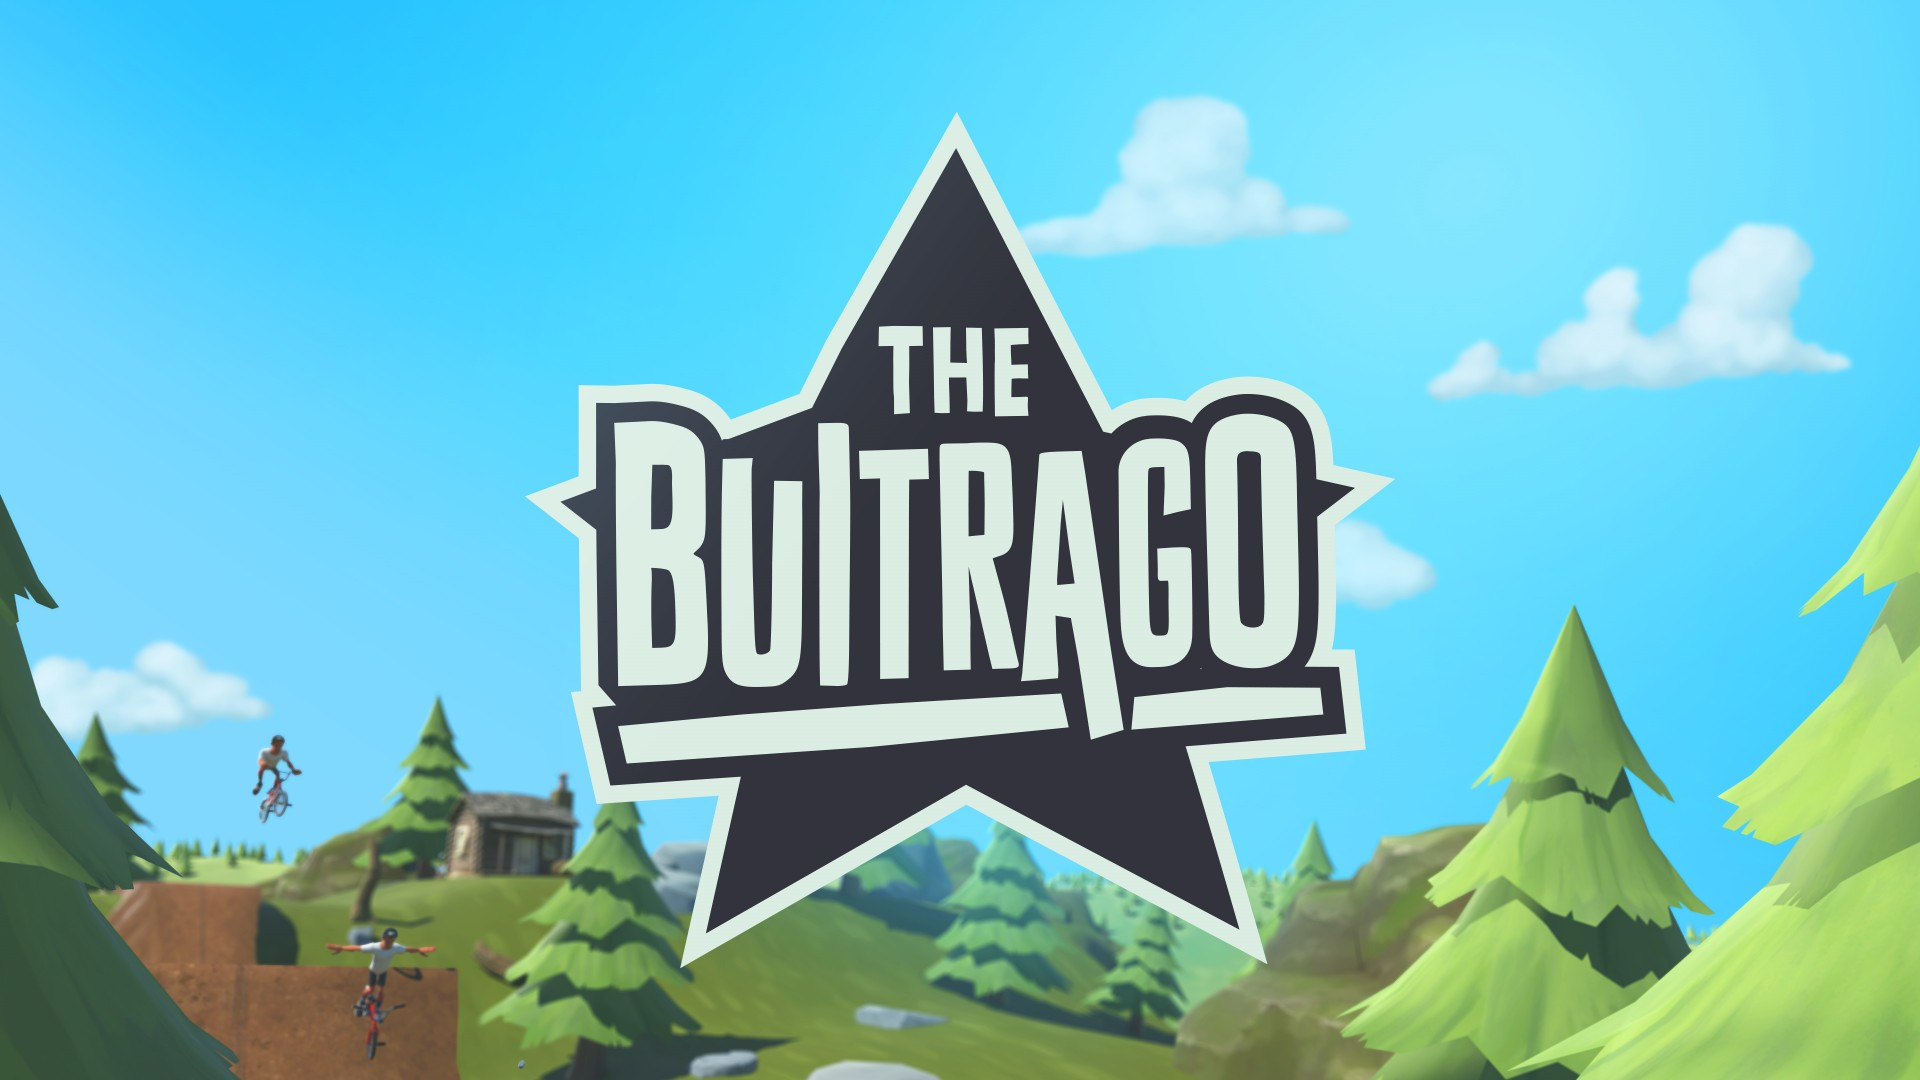 Icon for The Buitrago